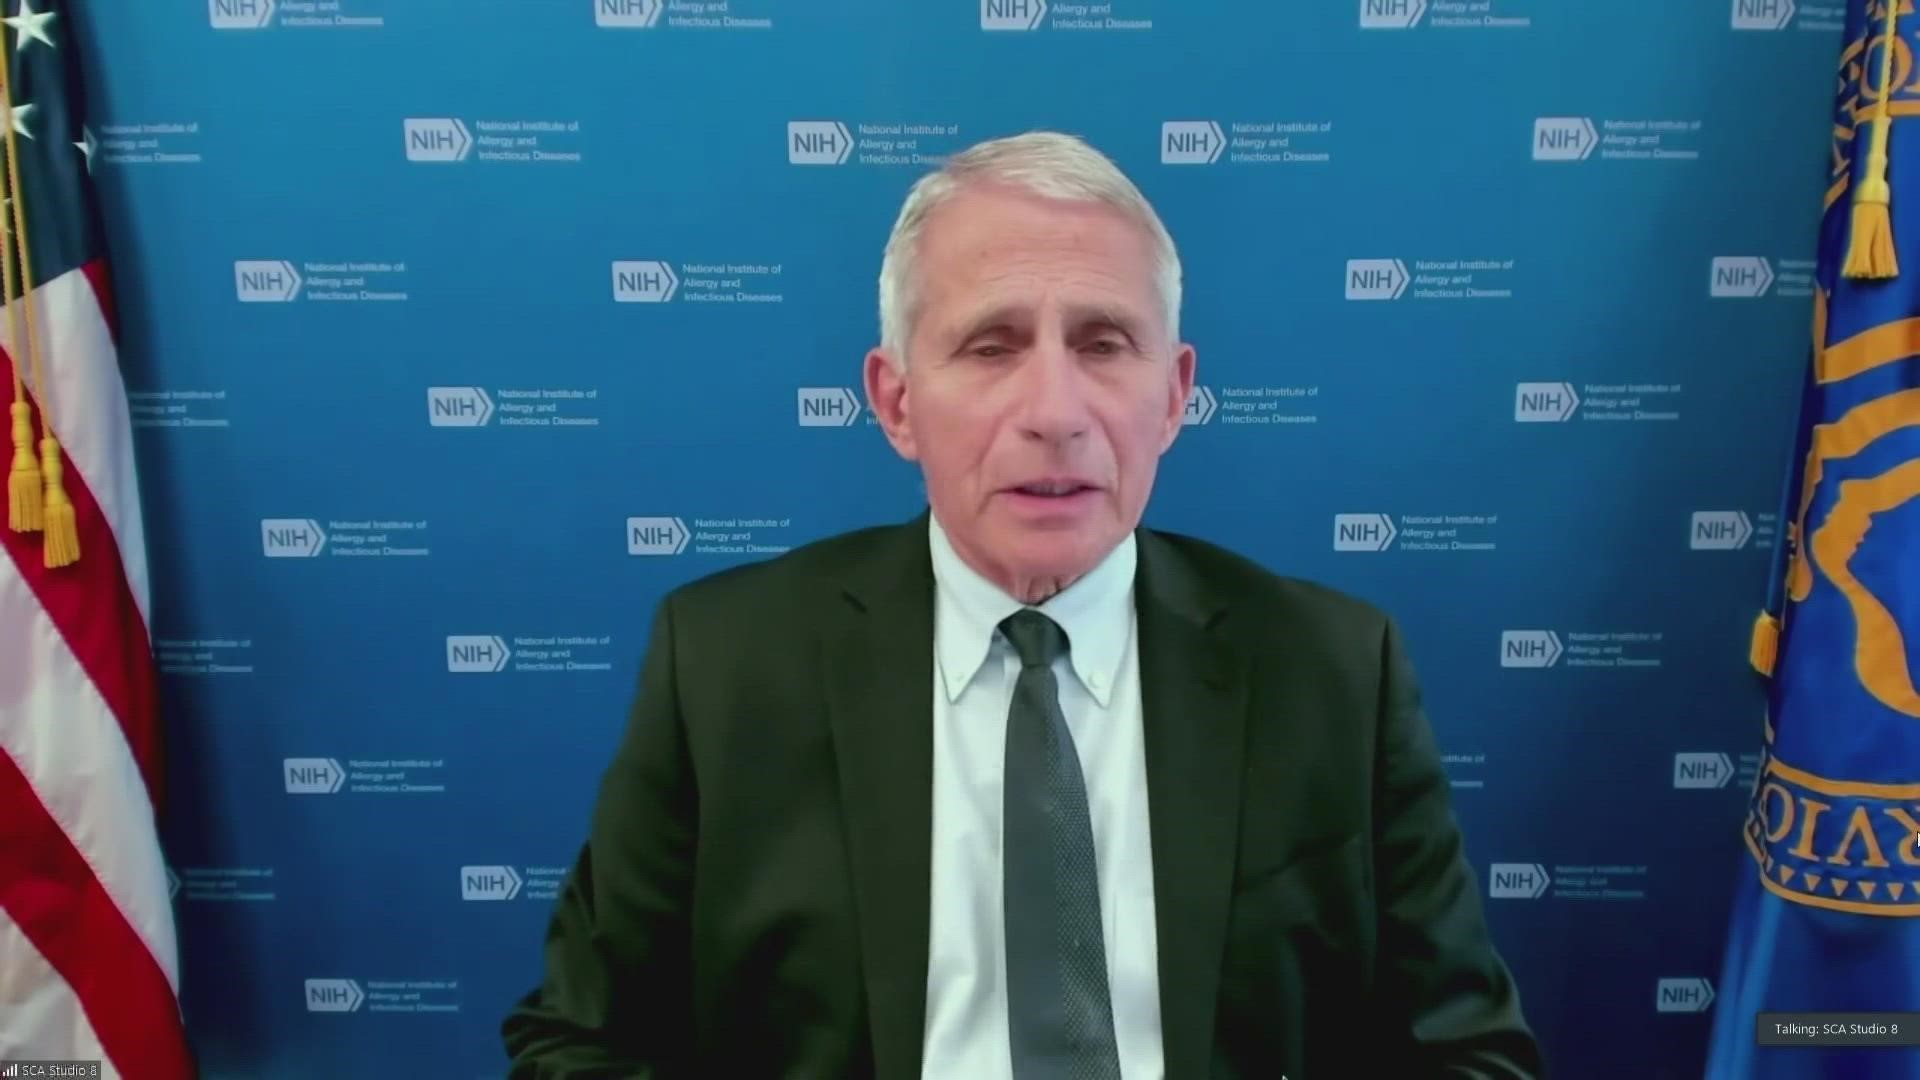 Dr. Anthony Fauci addresses the different coronavirus variants including delta and mu.